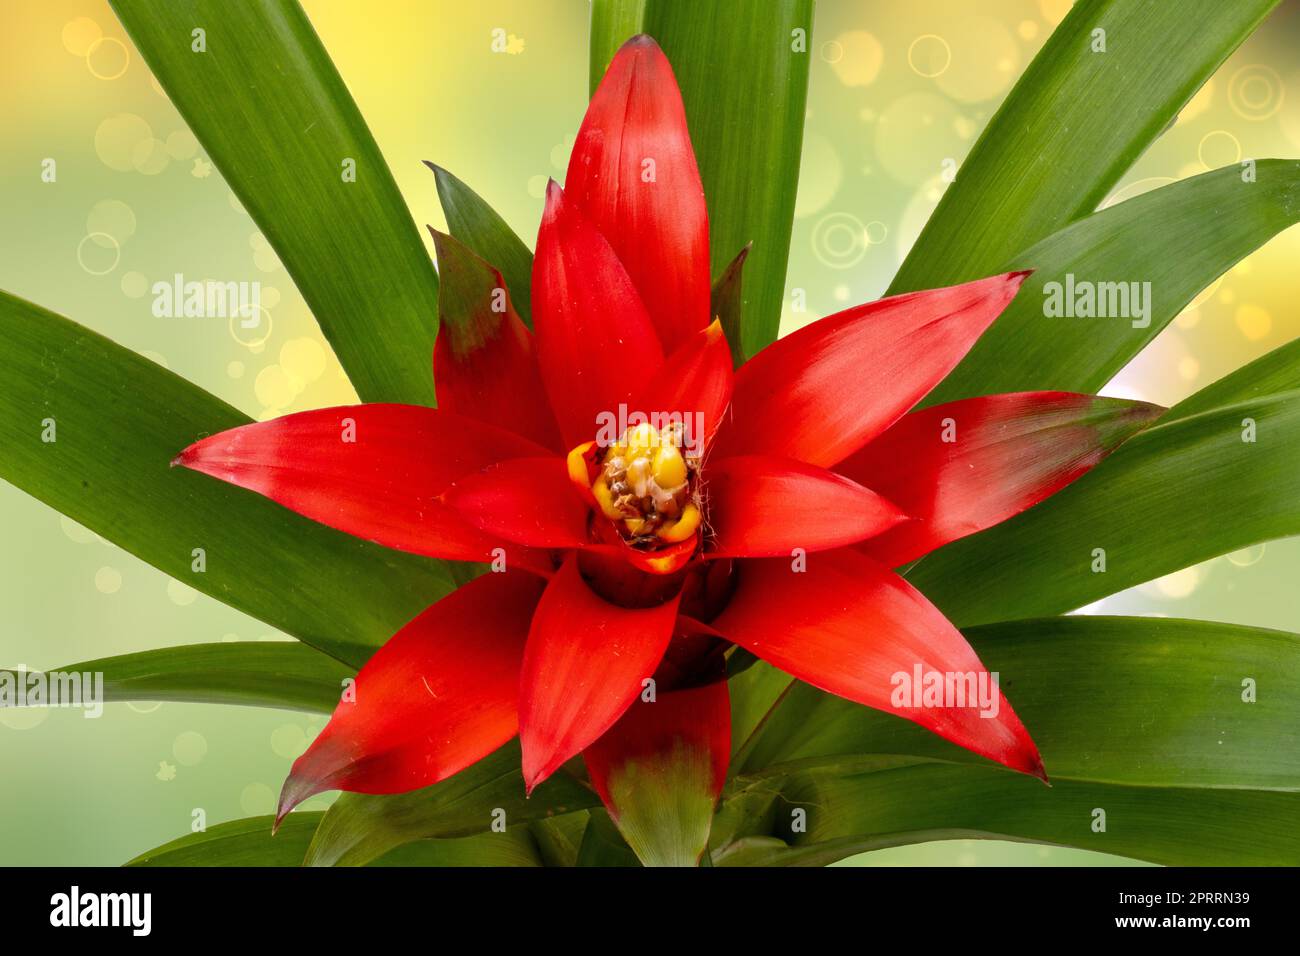 Close-up of a natural beautiful red bromeliads blossom over abstract light green yellow background.  (Guzmania ligulata). Macro. Card concept. Stock Photo